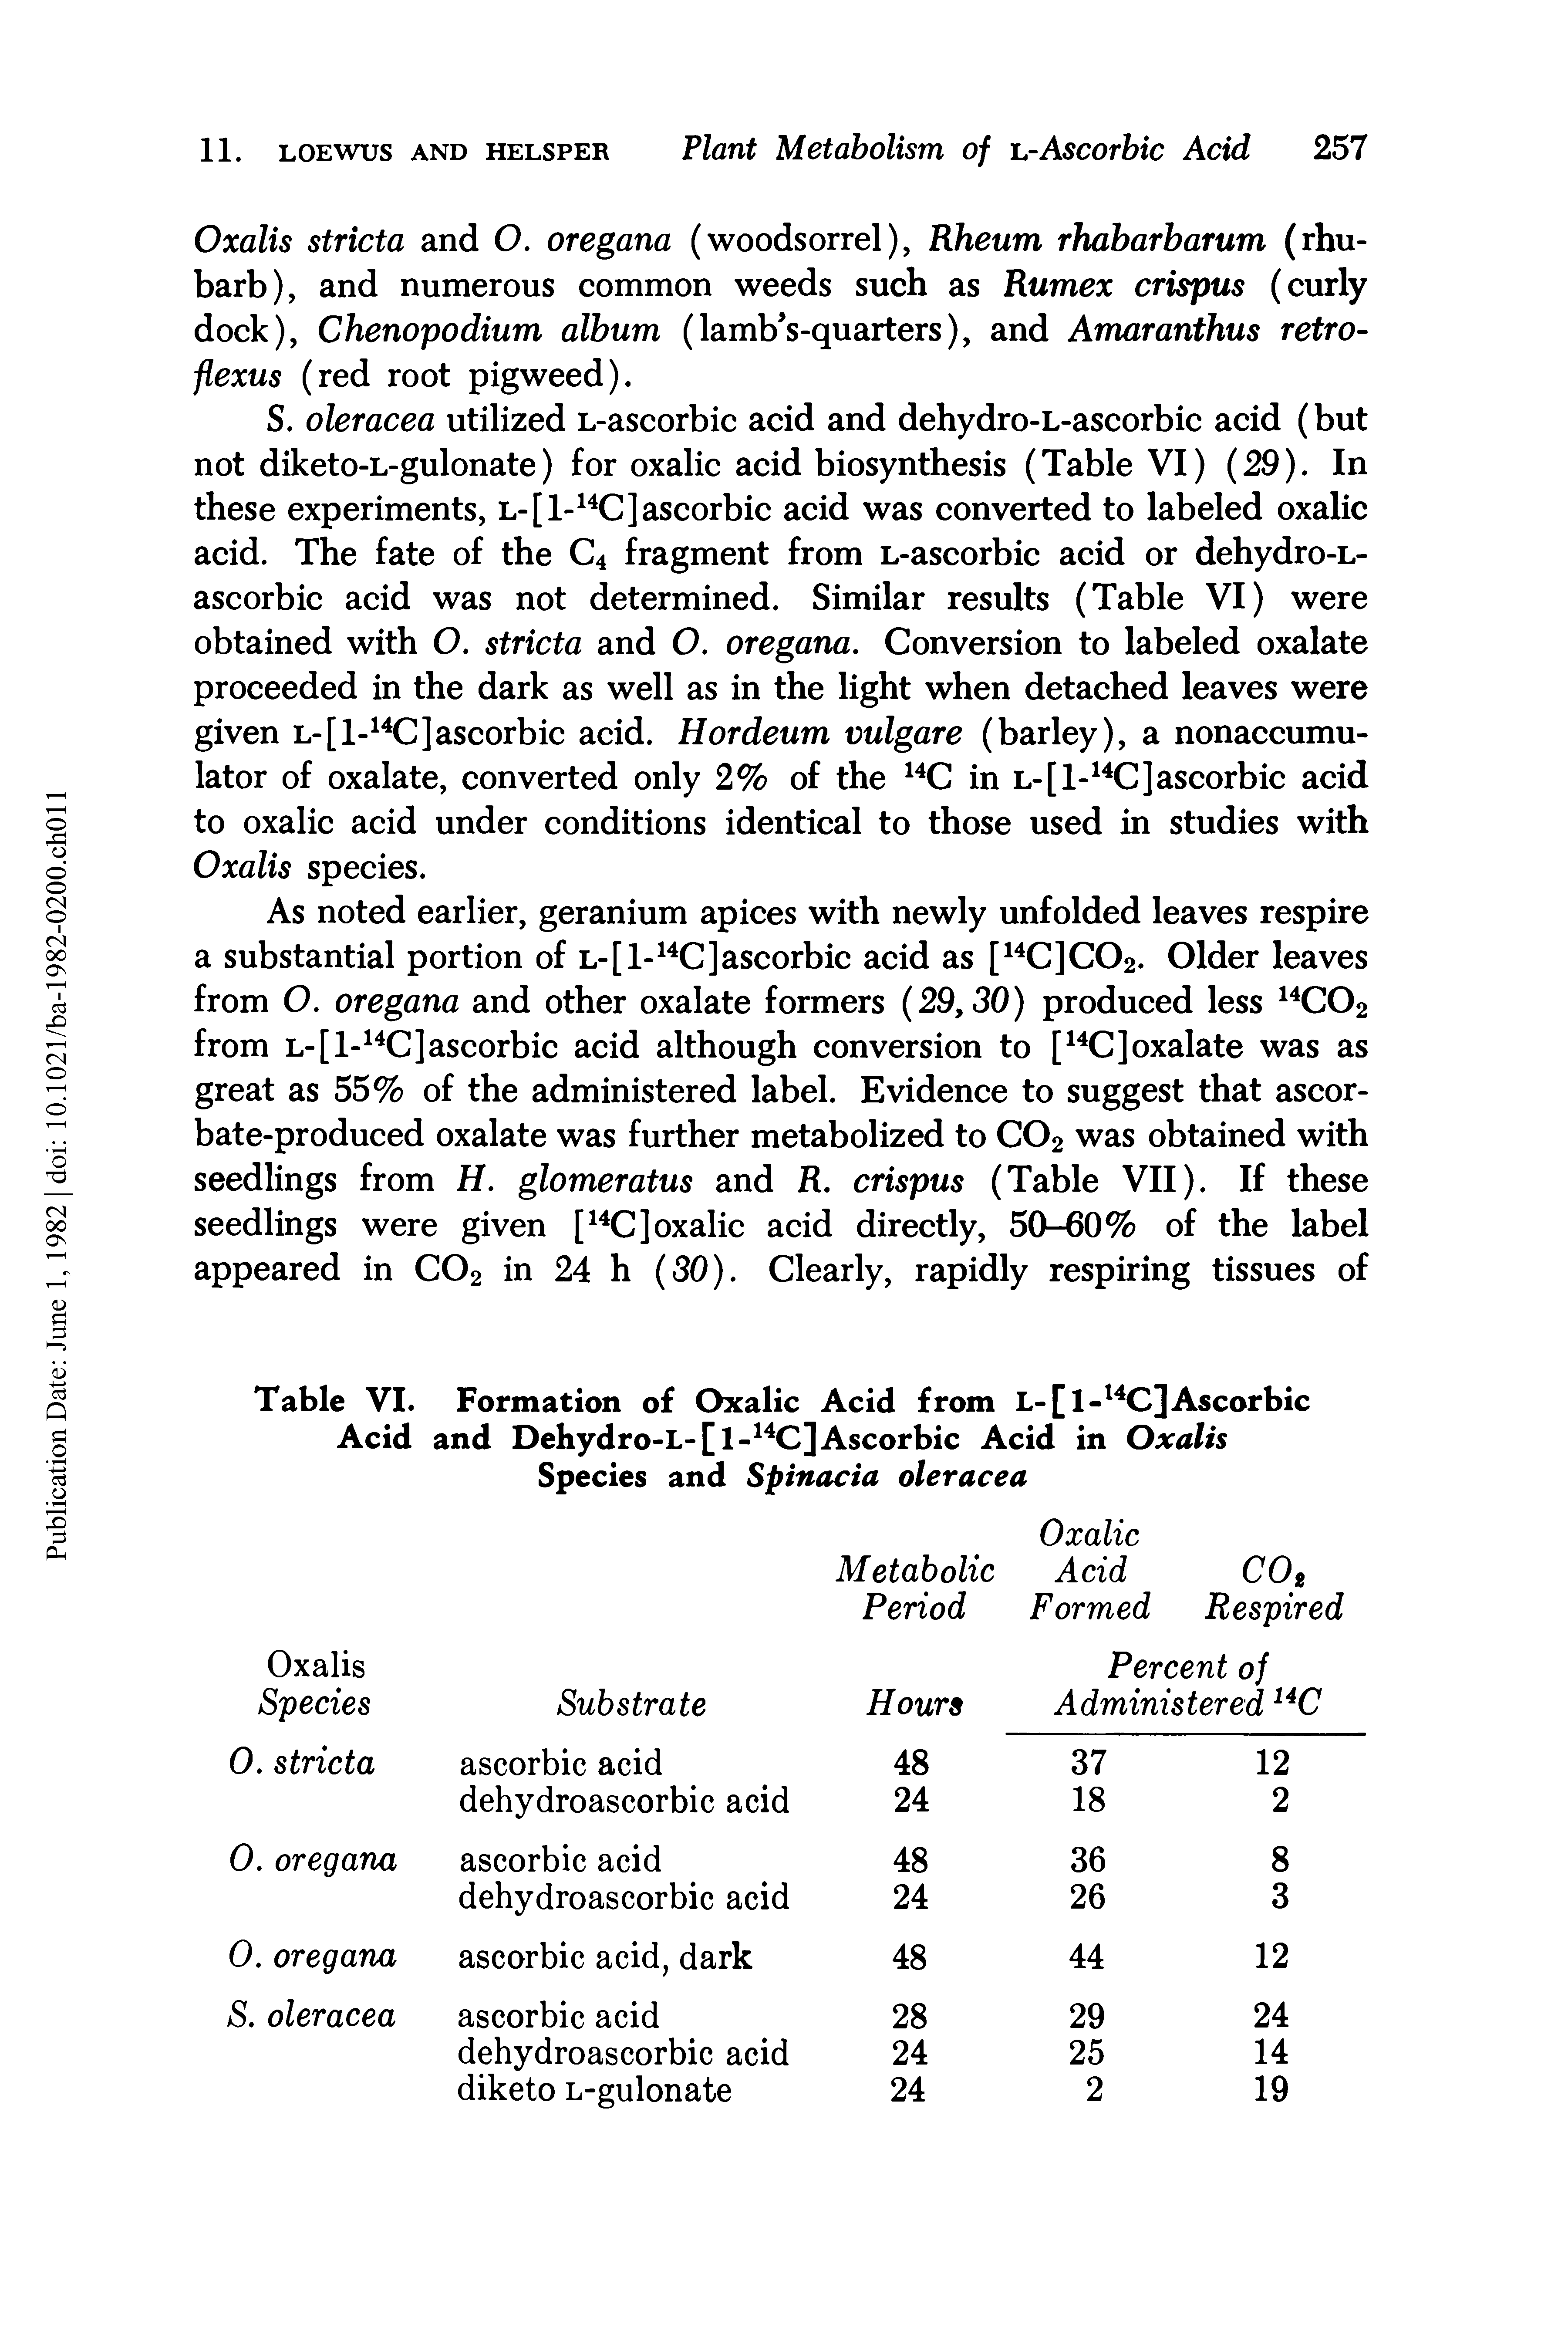 Table VI. Formation of Oxalic Acid from L-[l- C]Ascorbic Acid and Dehydro-L-[l- C]Ascorbic Acid in Oxalis Species and Spinacia oleracea...